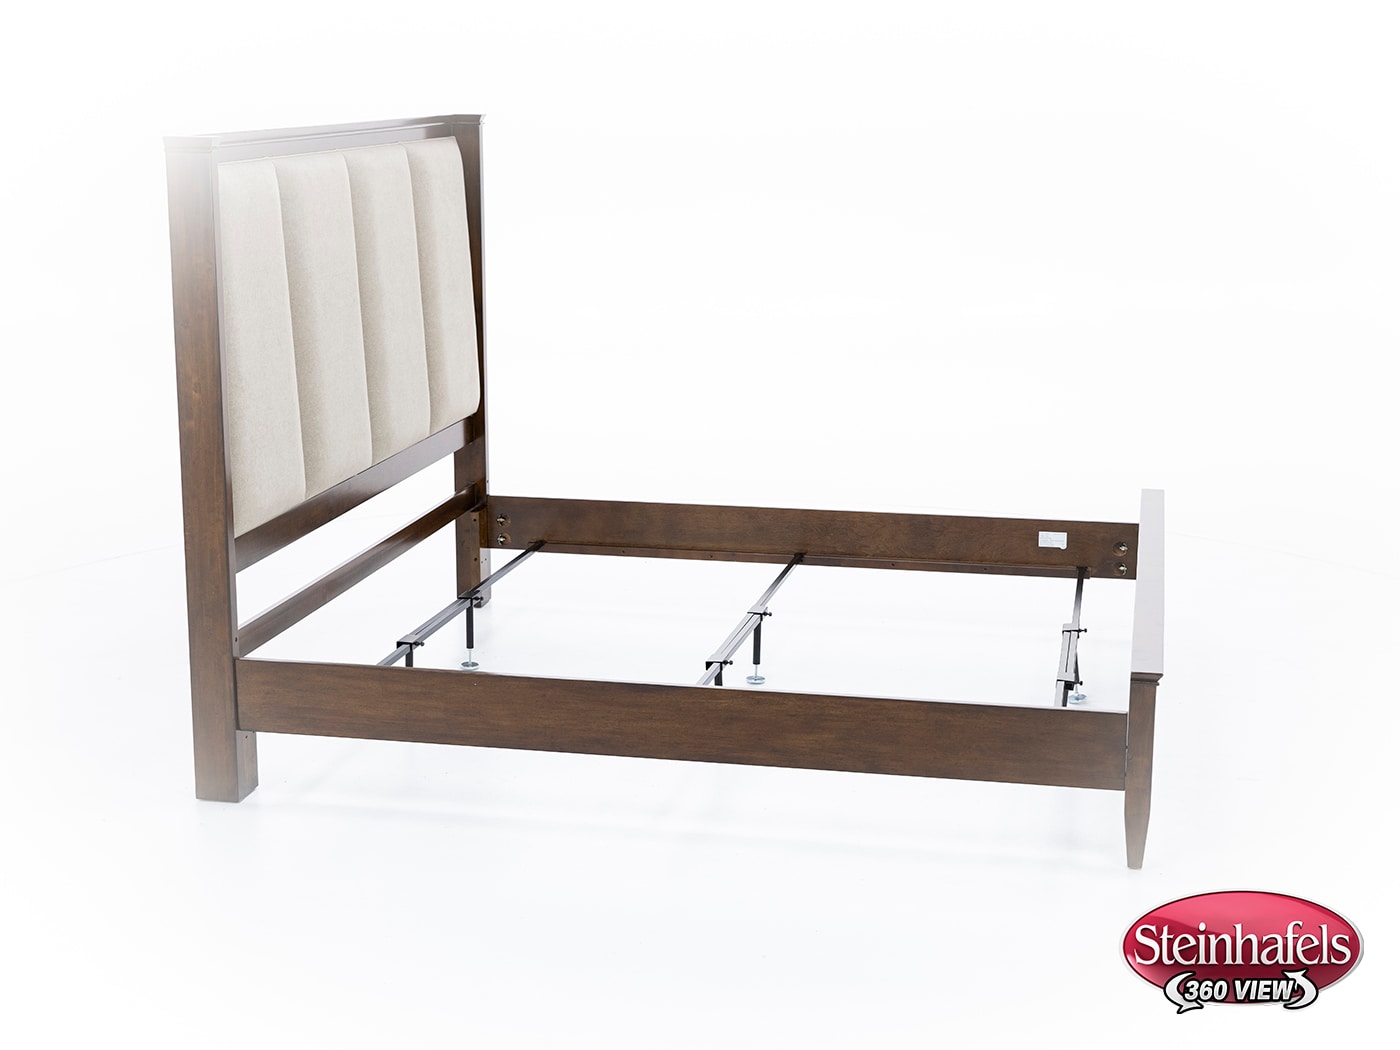 kincaid furniture king bed package  image pkp  